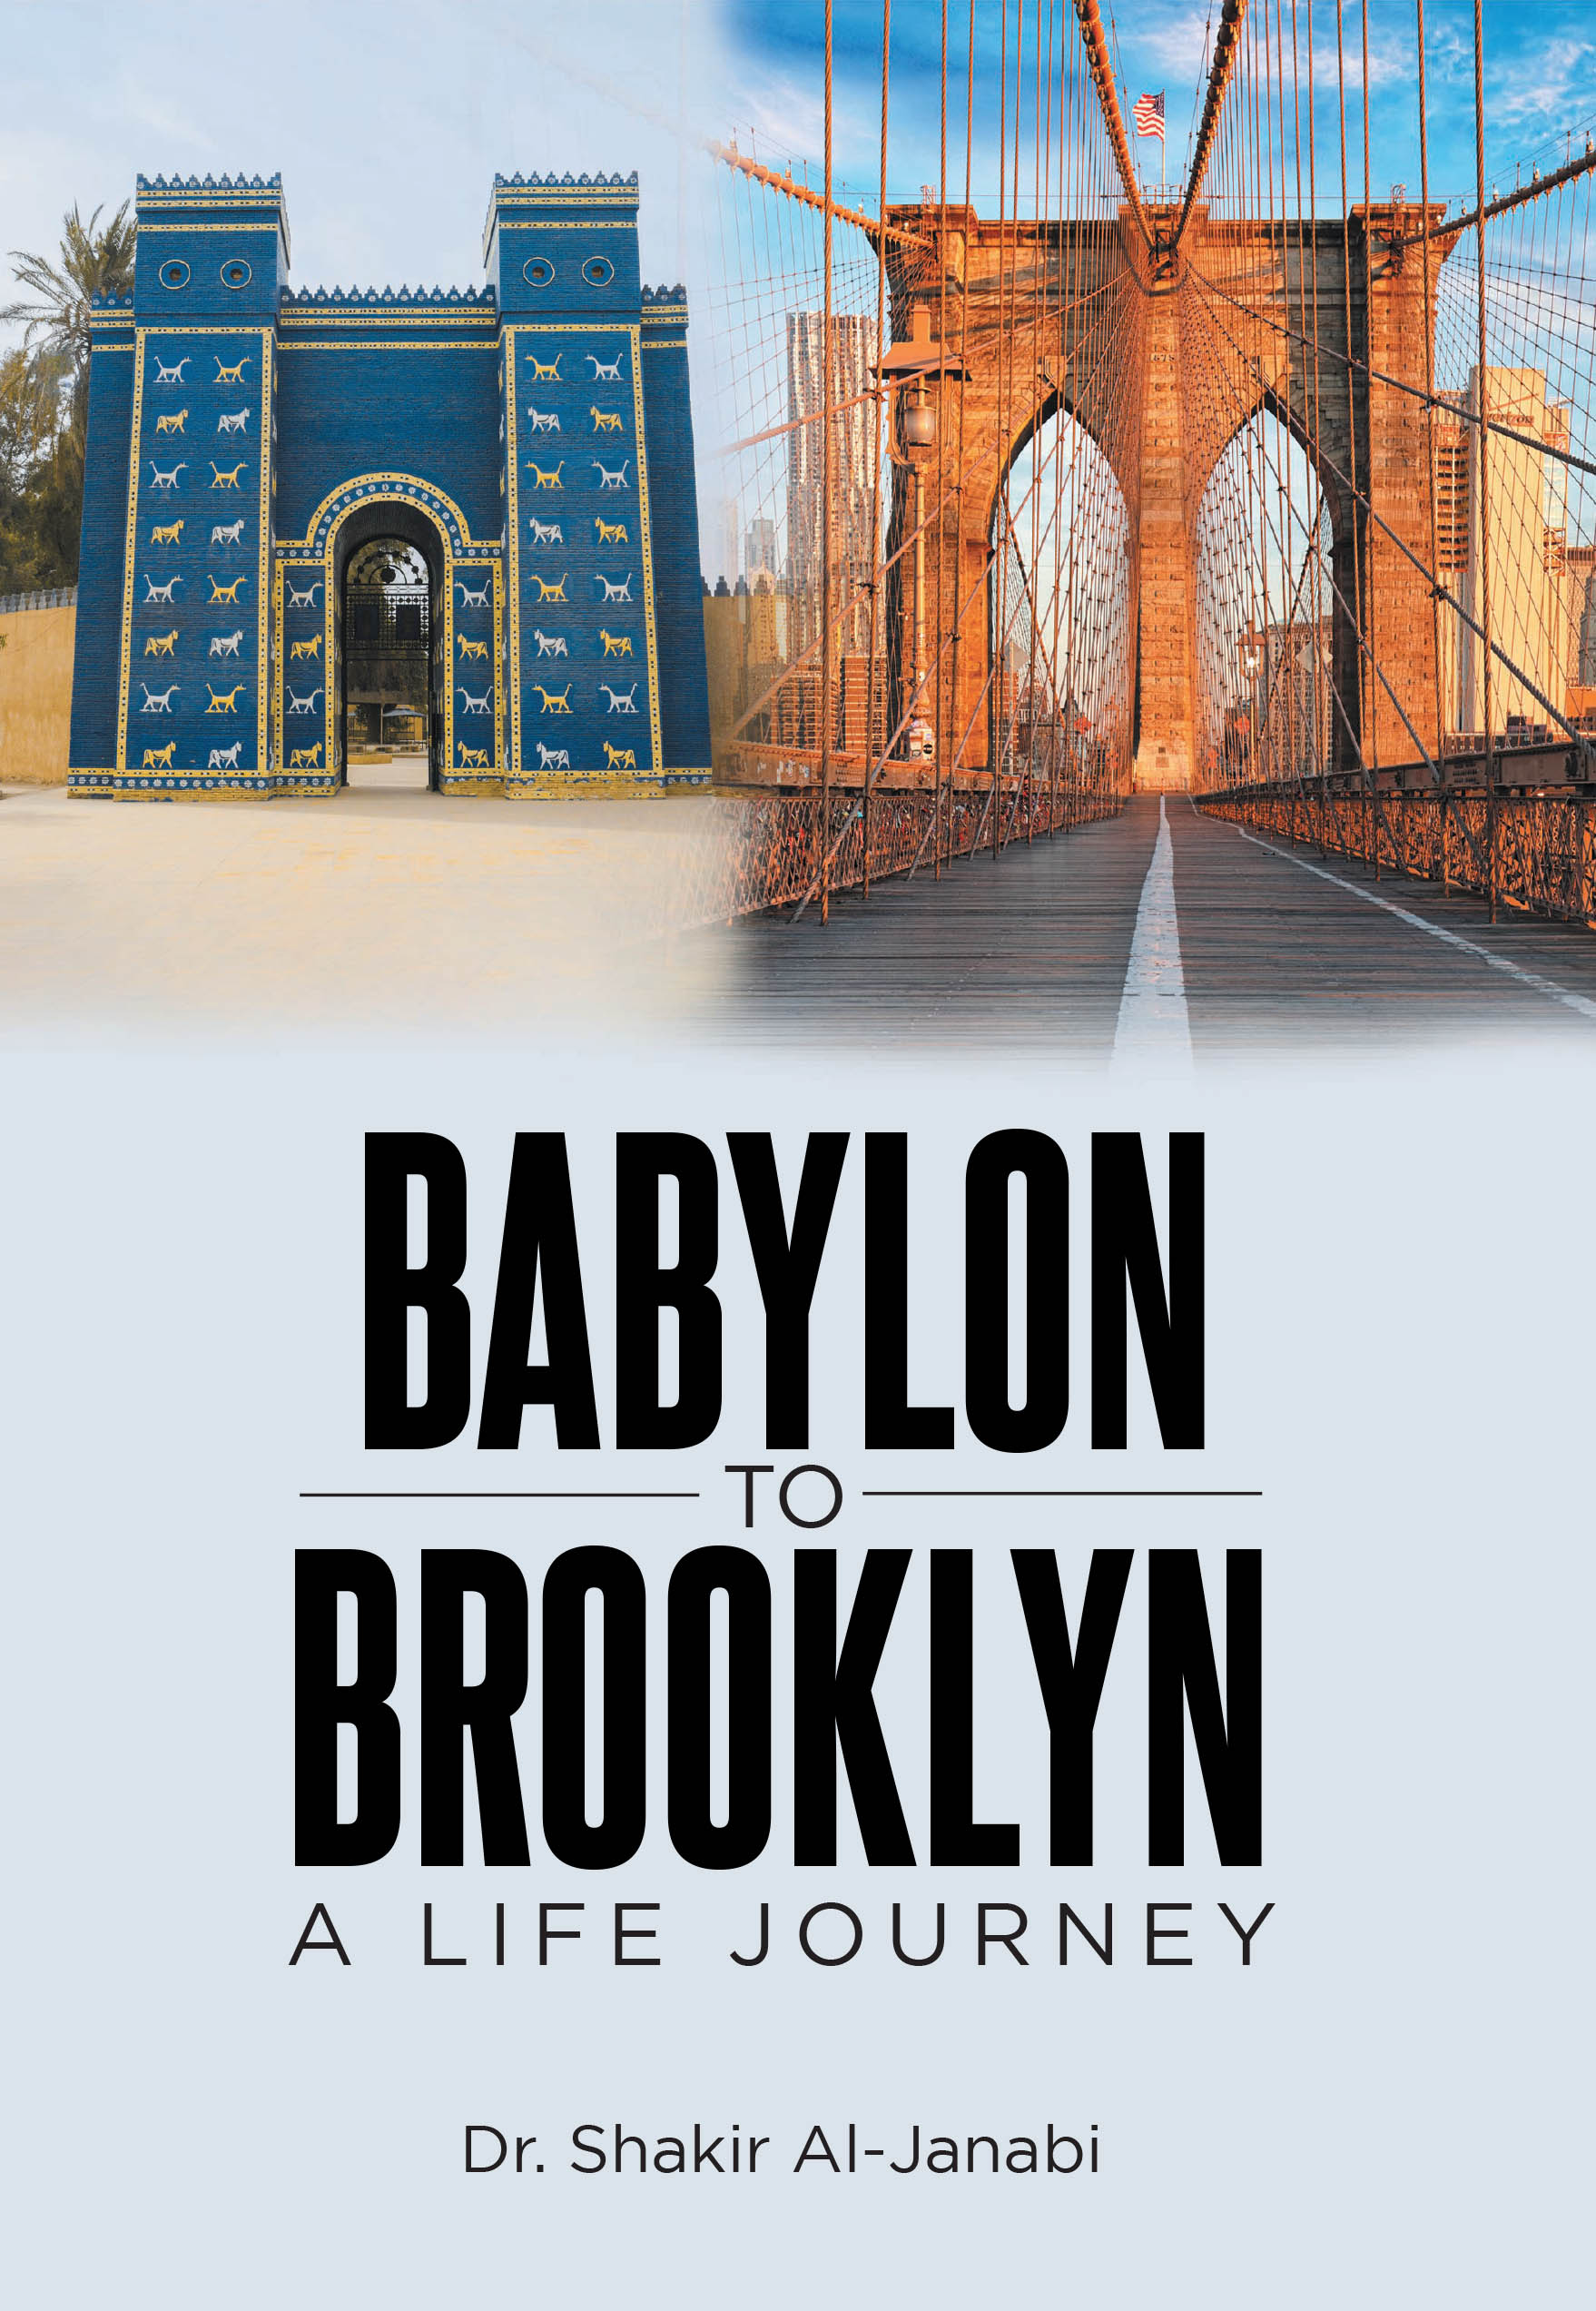 Author Dr. Shakir Al-Janabi’s New Book, "Babylon to Brooklyn," Documents the Author’s Return to Iraq Following Practicing Medicine Abroad in England and America